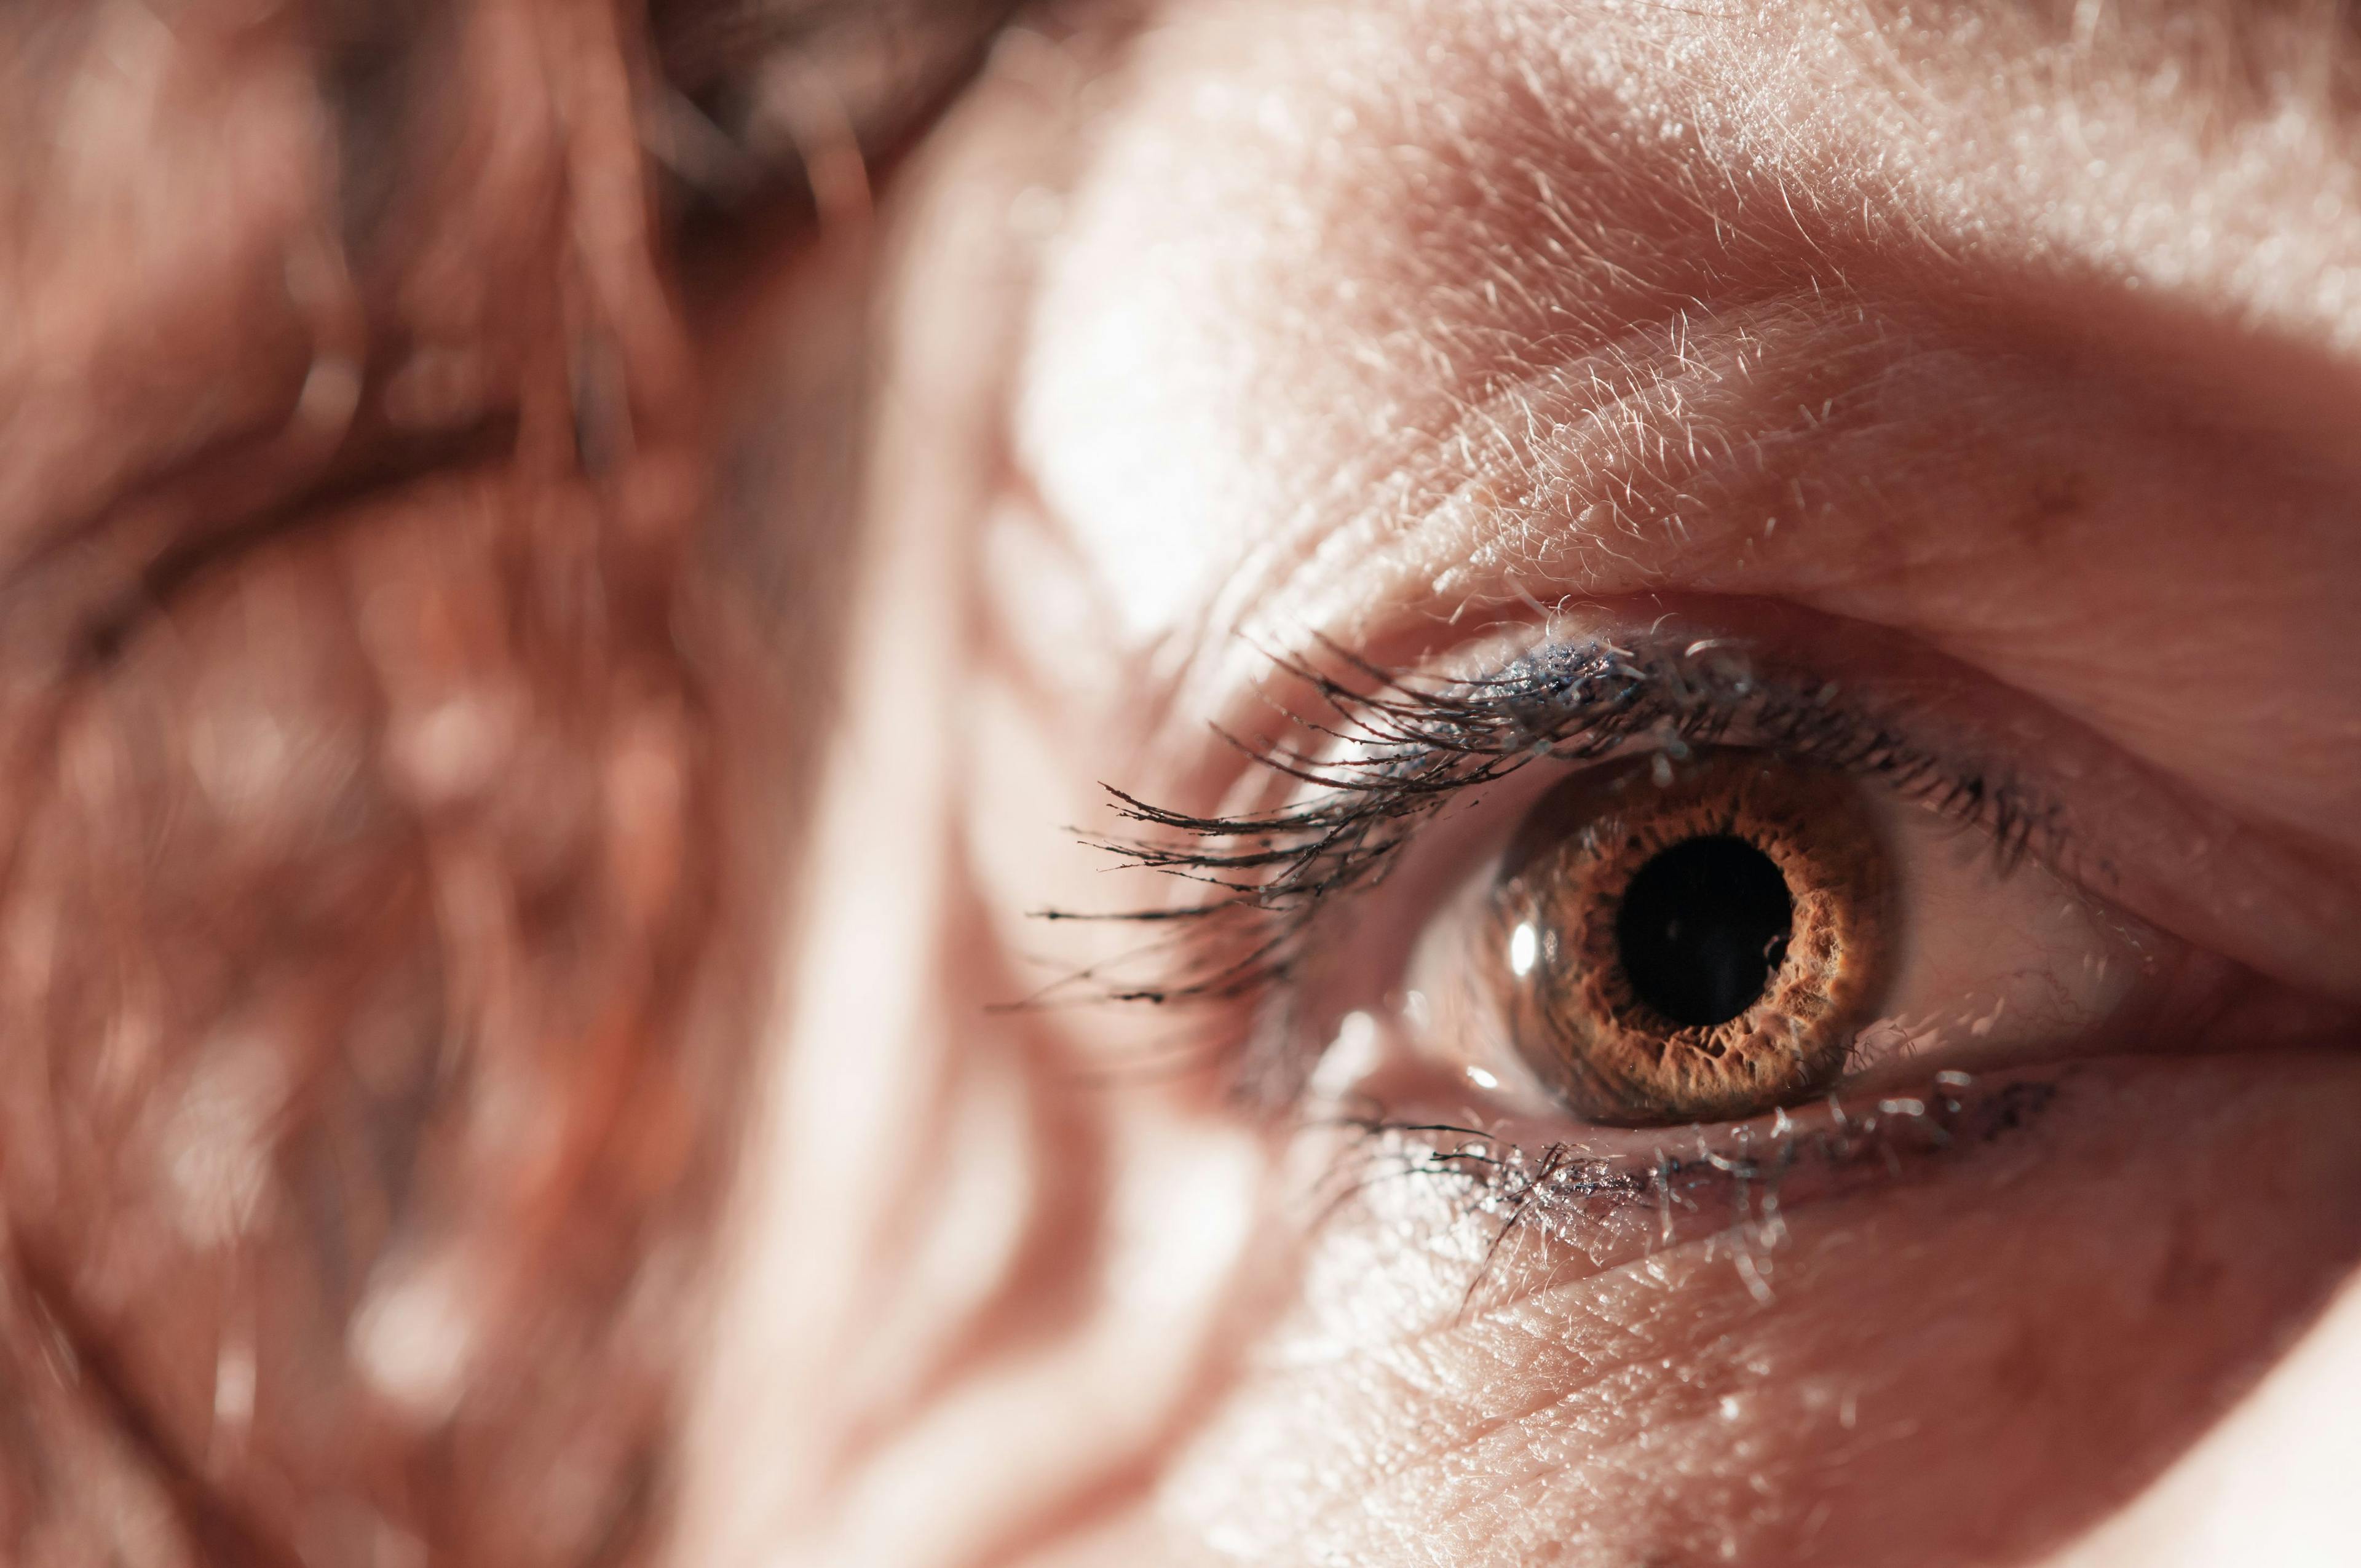 Exploratory data analysis from the trial of lampalizumab (Genentech/Roche) has shed new light on the behavior of geographic atrophy (GA), the advanced form of age-related macular degeneration (AMD) (Adobe Stock Image)